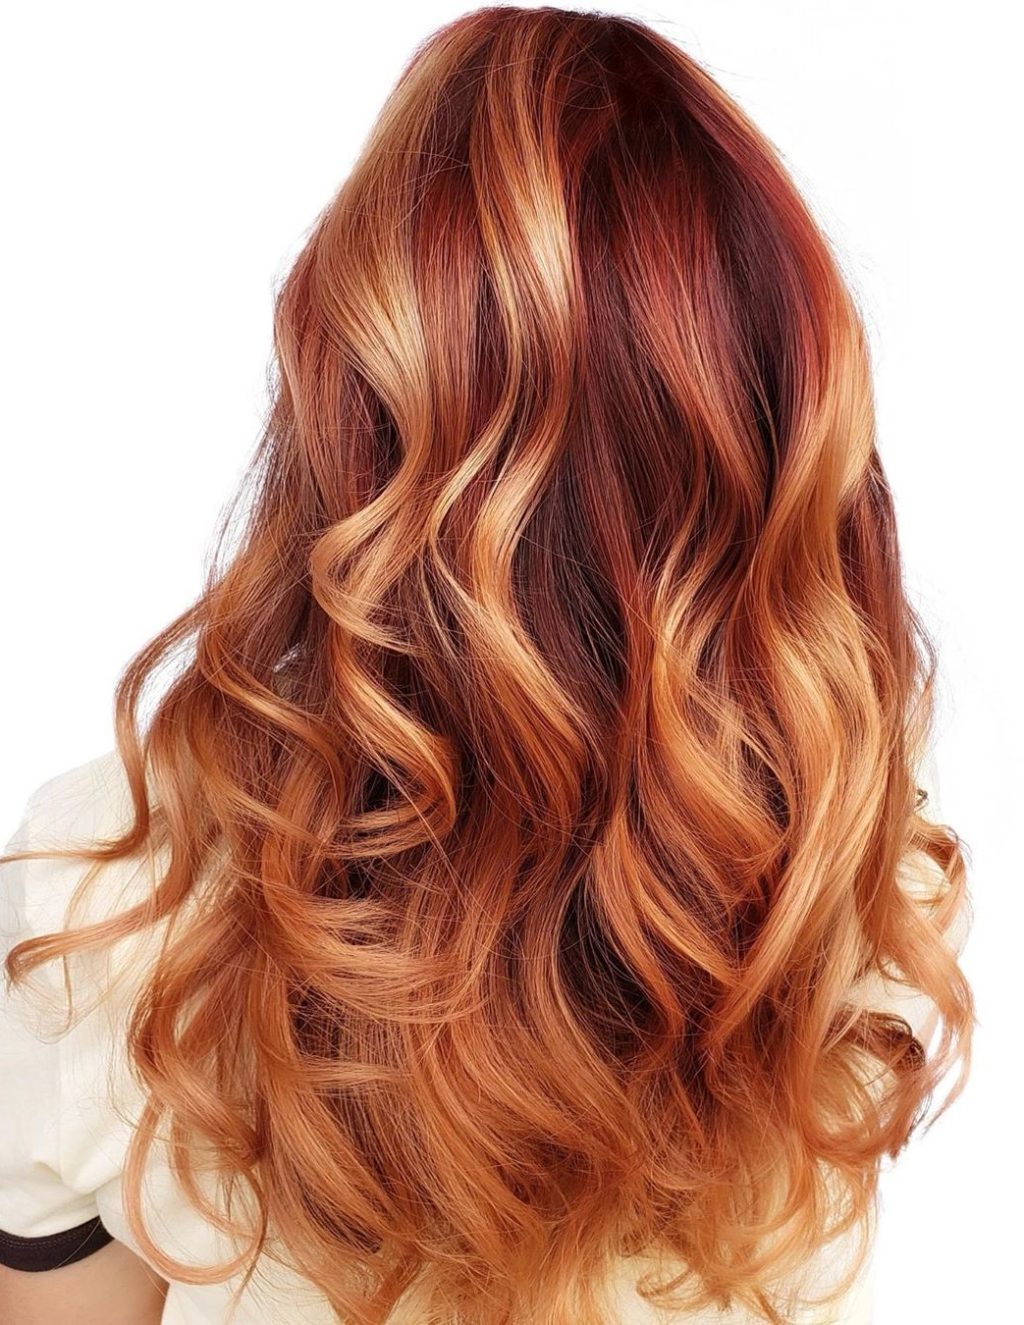 strawberry blonde hair with blonde highlights